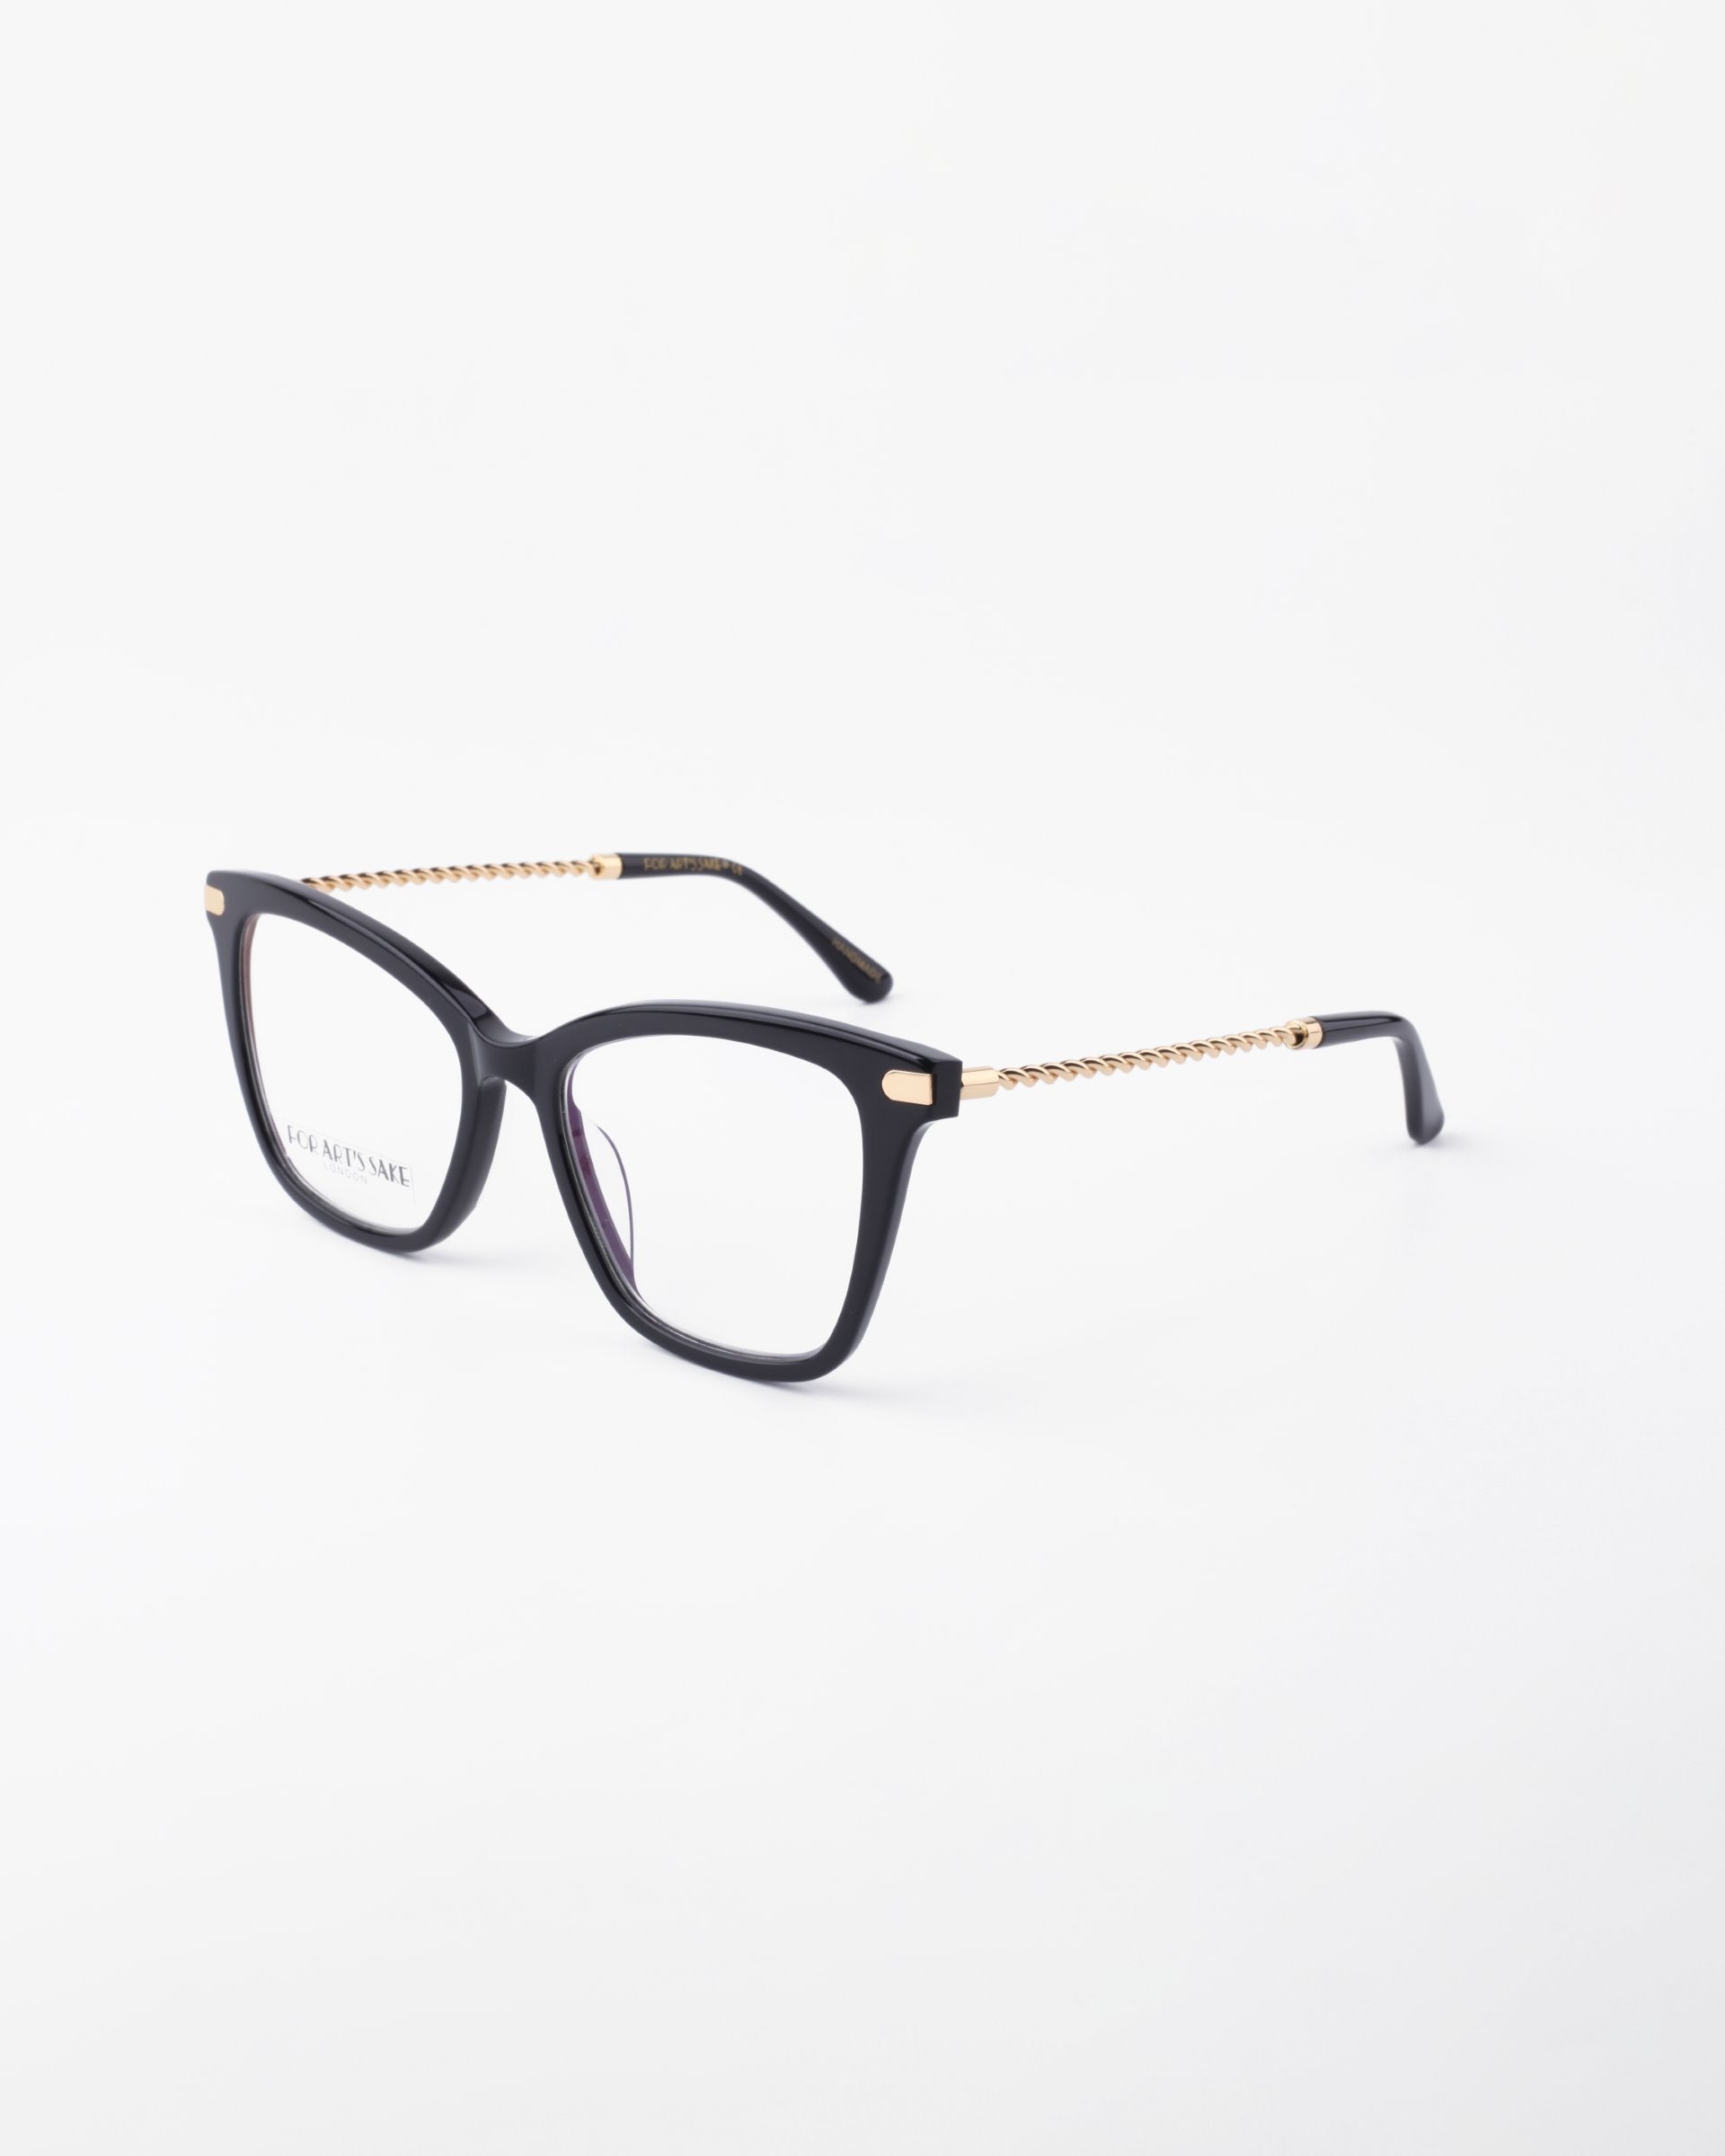 A pair of For Art&#39;s Sake® Paris Two black framed glasses with gold accents and chain-like details on the temples are positioned against a plain white background. The lenses, featuring a blue light filter, are clear, and the overall design is modern and stylish.